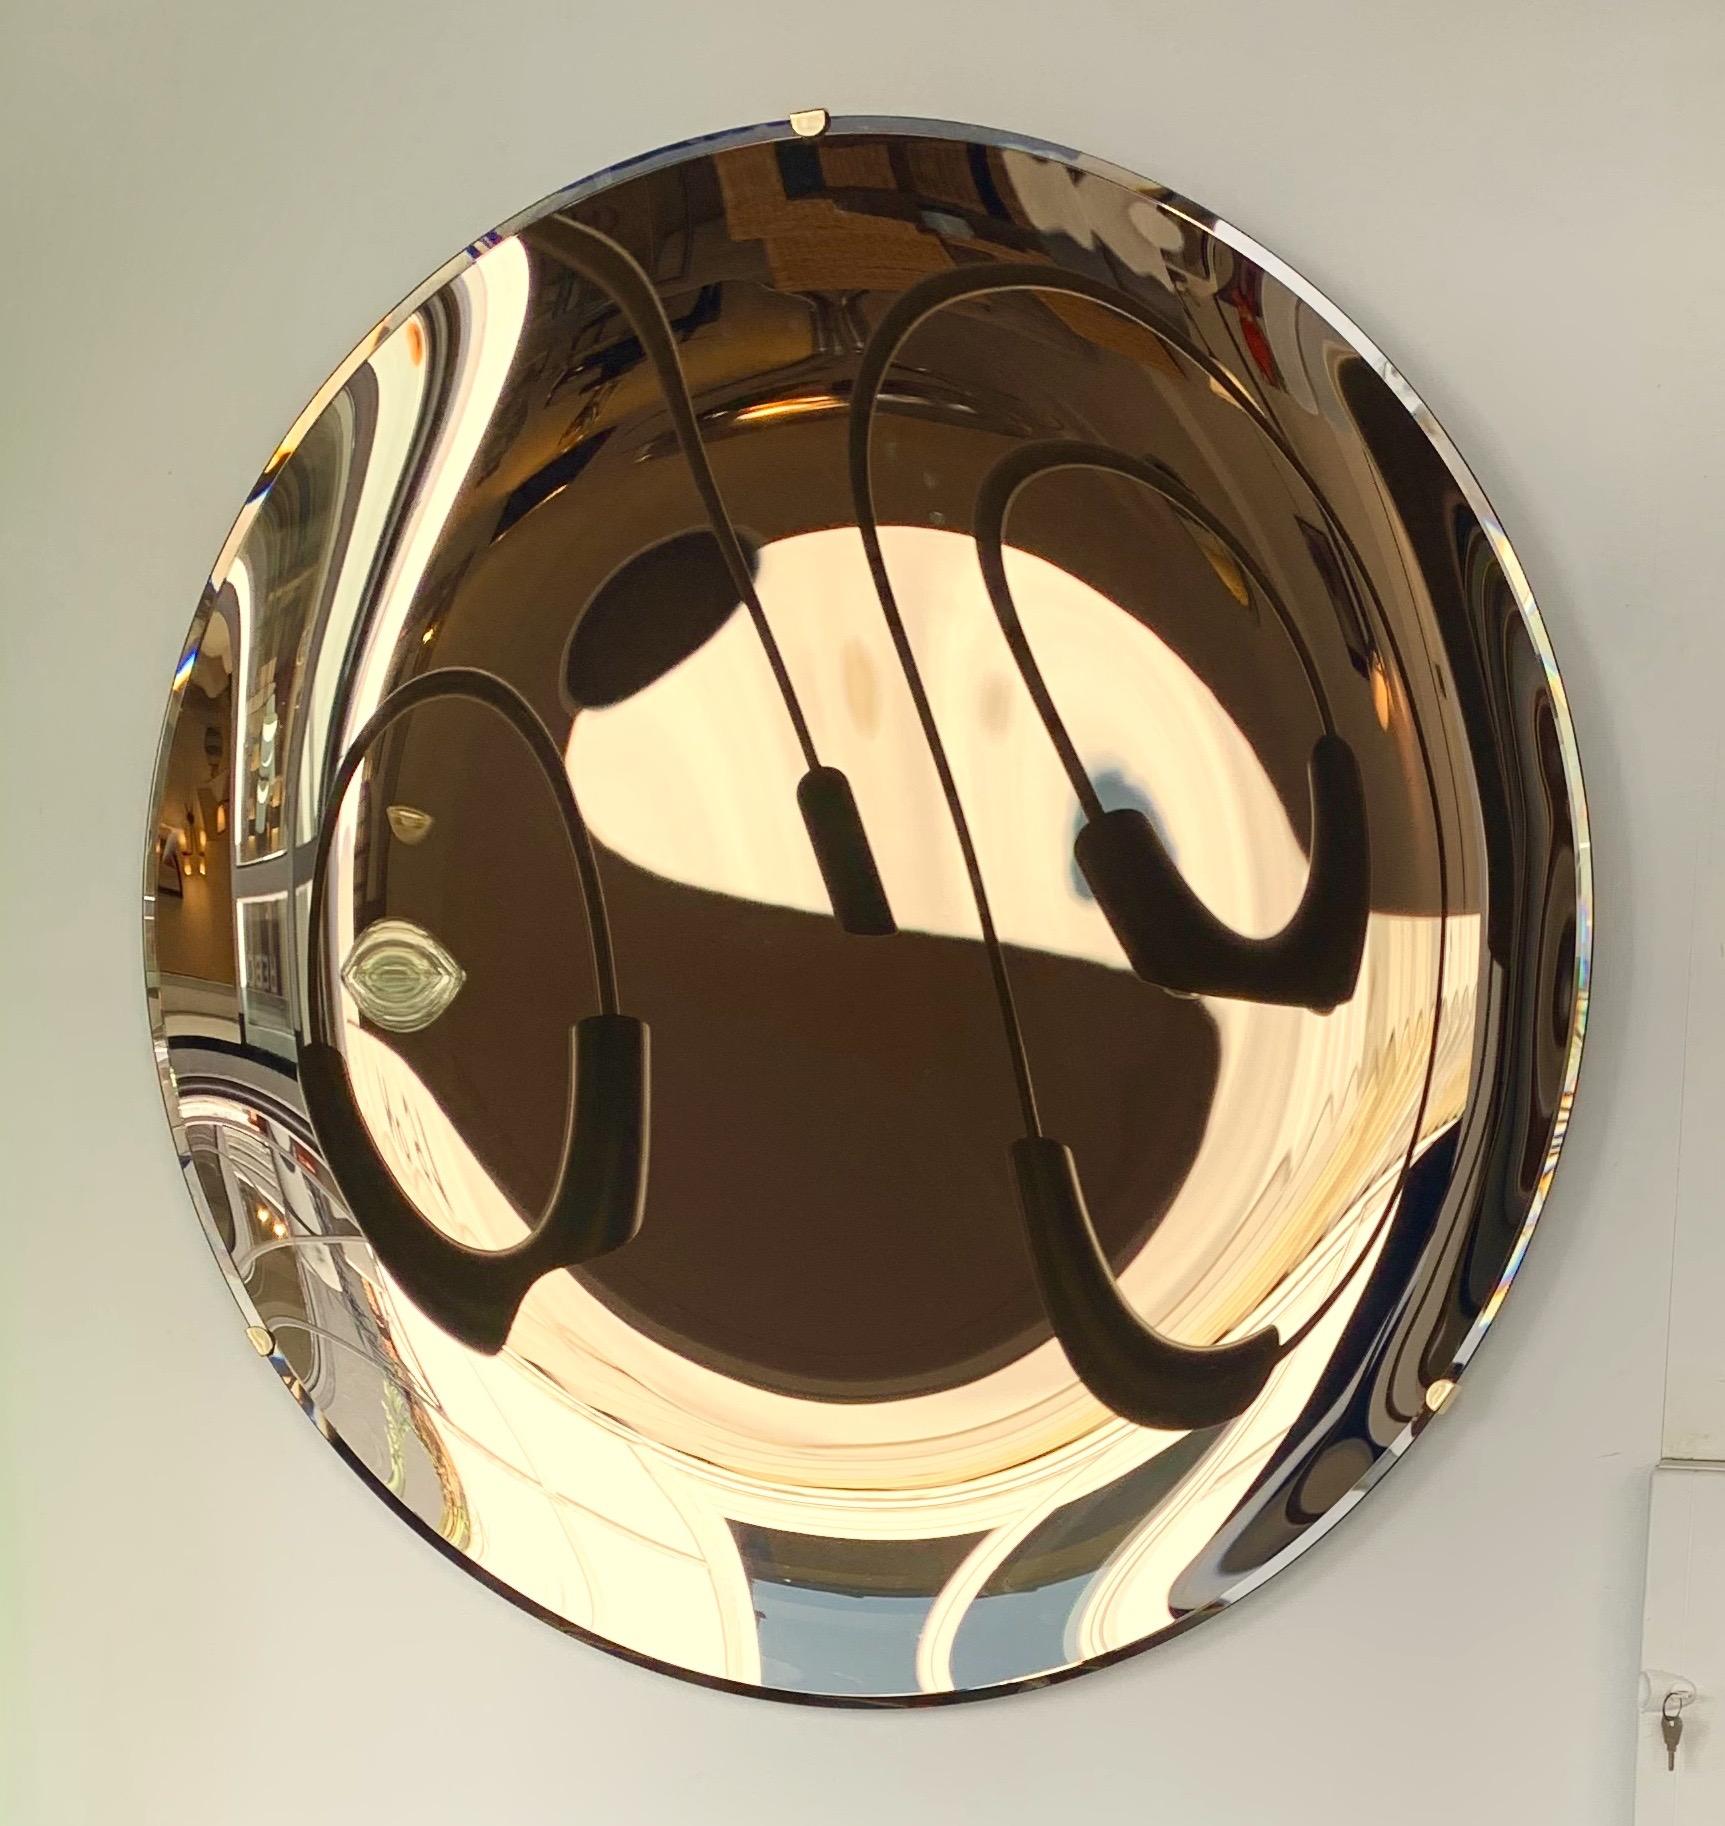 Contemporary curve concave gold bronze wall mirror, brass structure. Artisanal handmade work made by a small italian design workshop using the old style mercurization technic.

standart diameter dimensions indicated in description 43.31